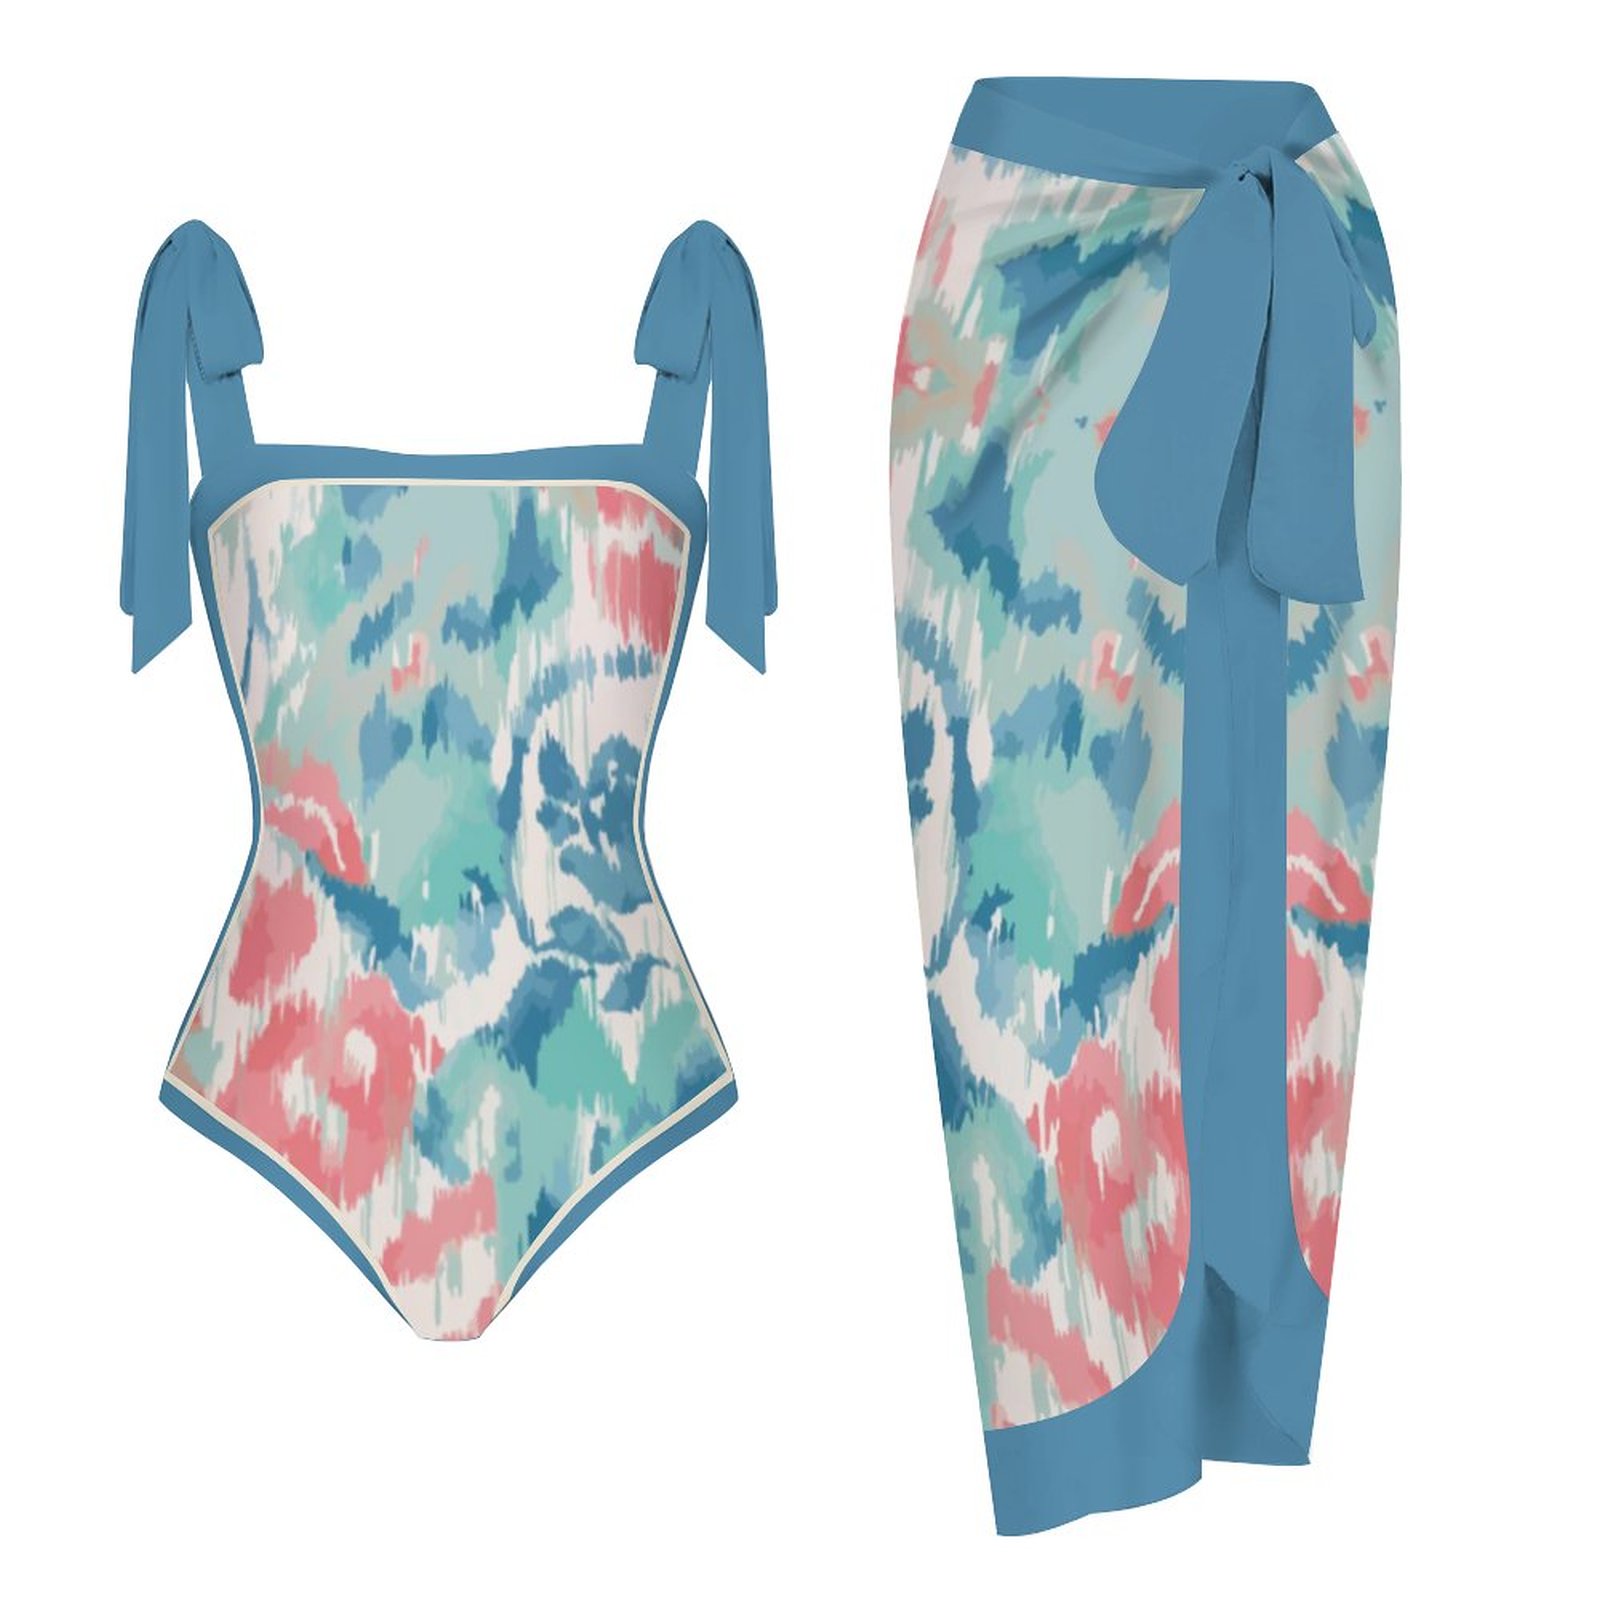 Fashion Printed One Piece Swimsuit And Cover Up